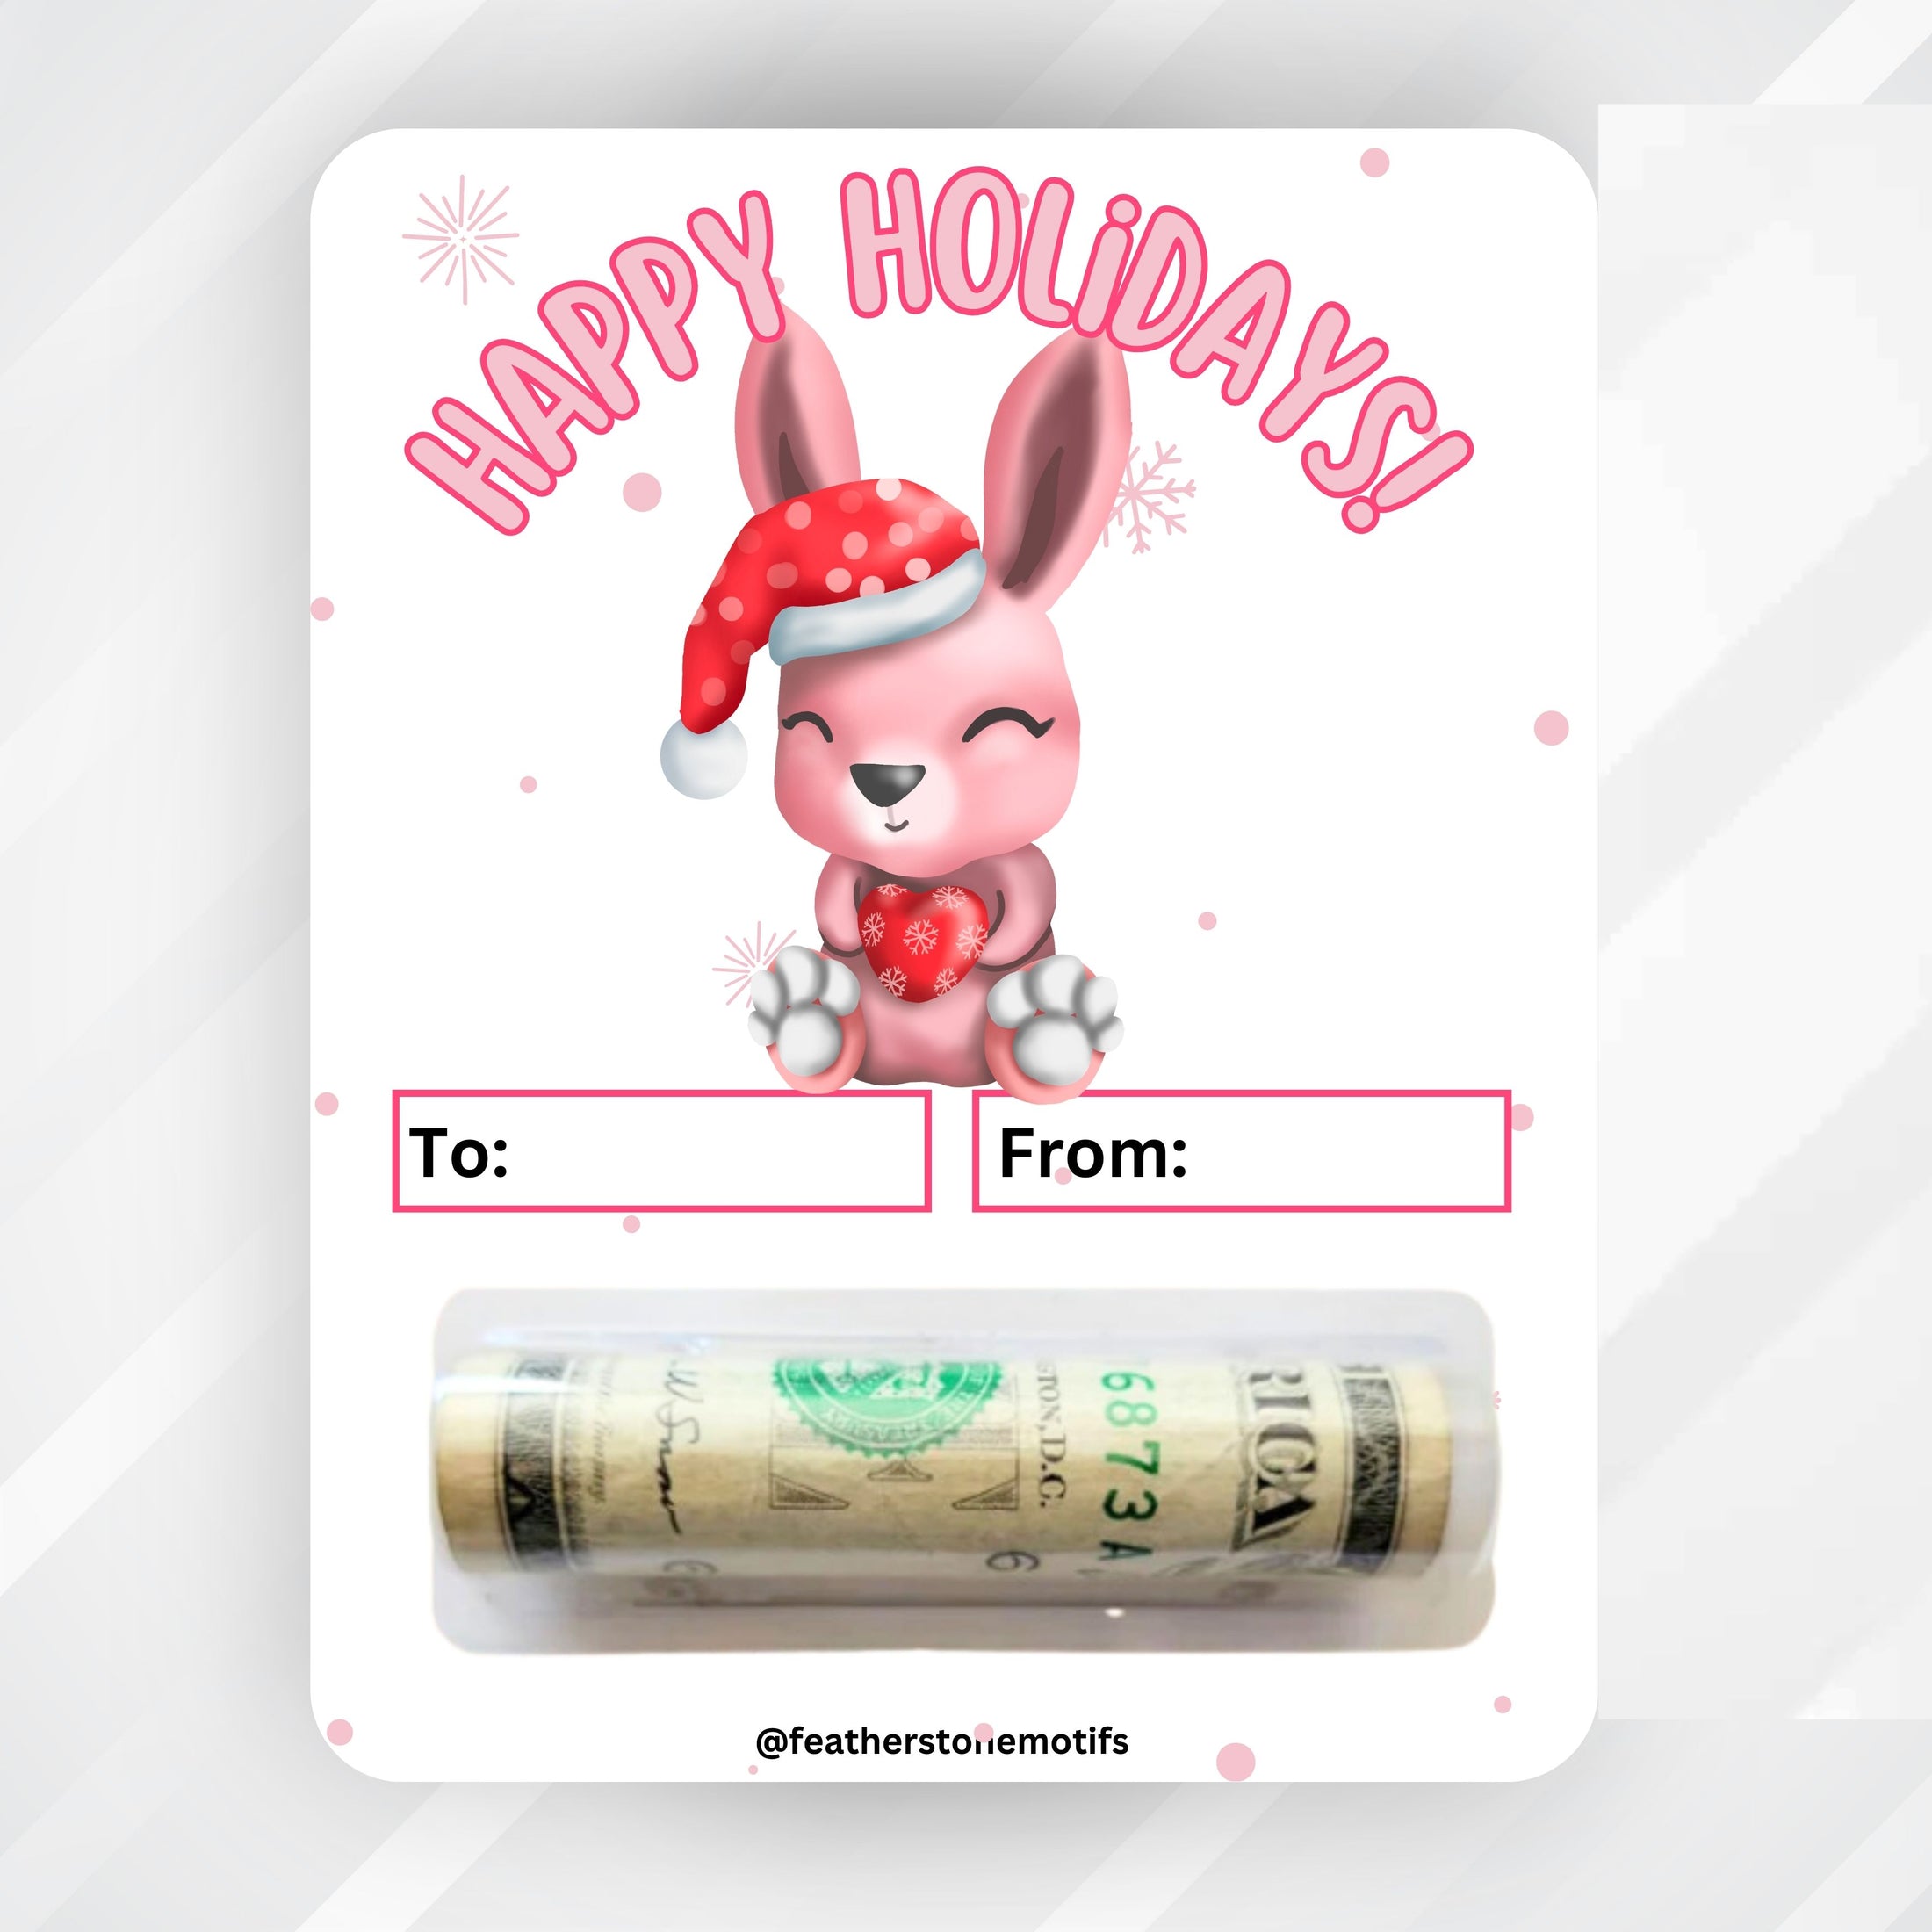 This image shows the money tube attached to the Holiday Bunny 2 Money Card.